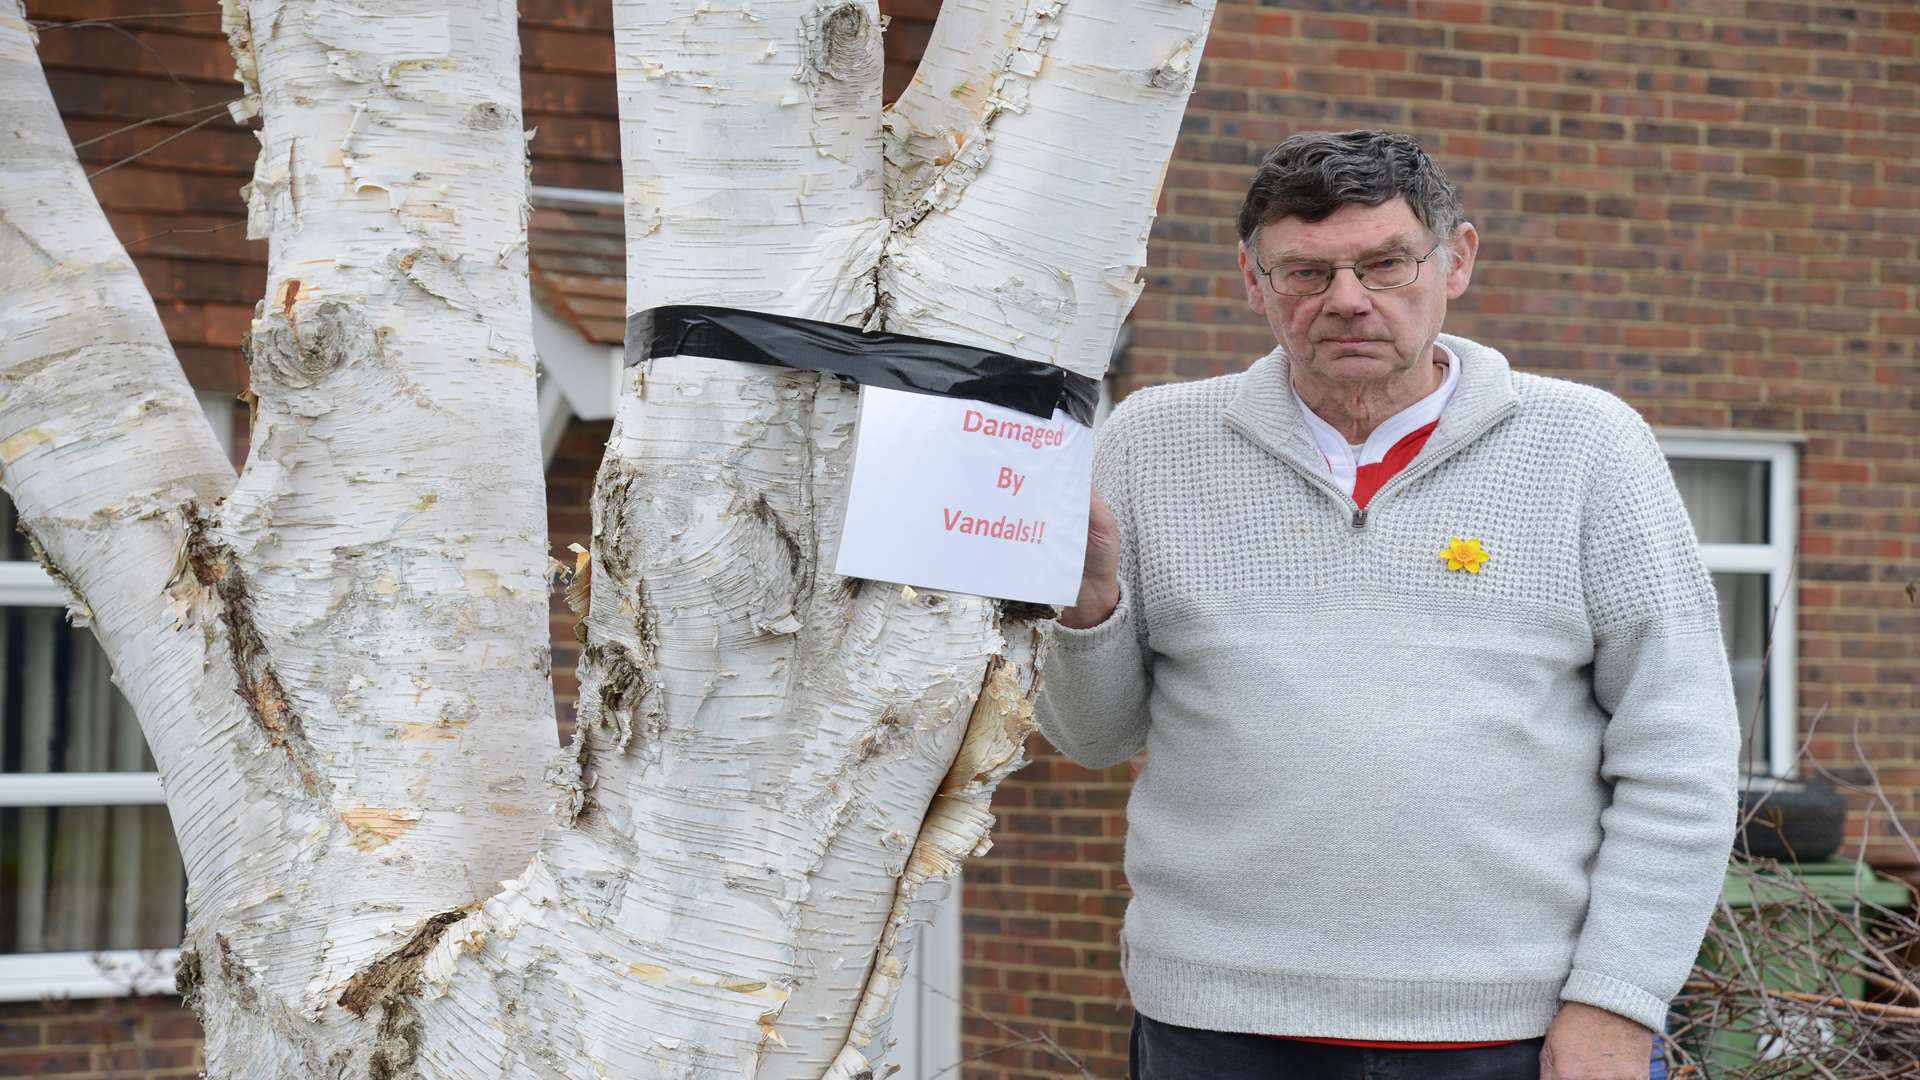 Paul Durkin and the Himalayan Silver Burch tree in his garden which has been vandalised.